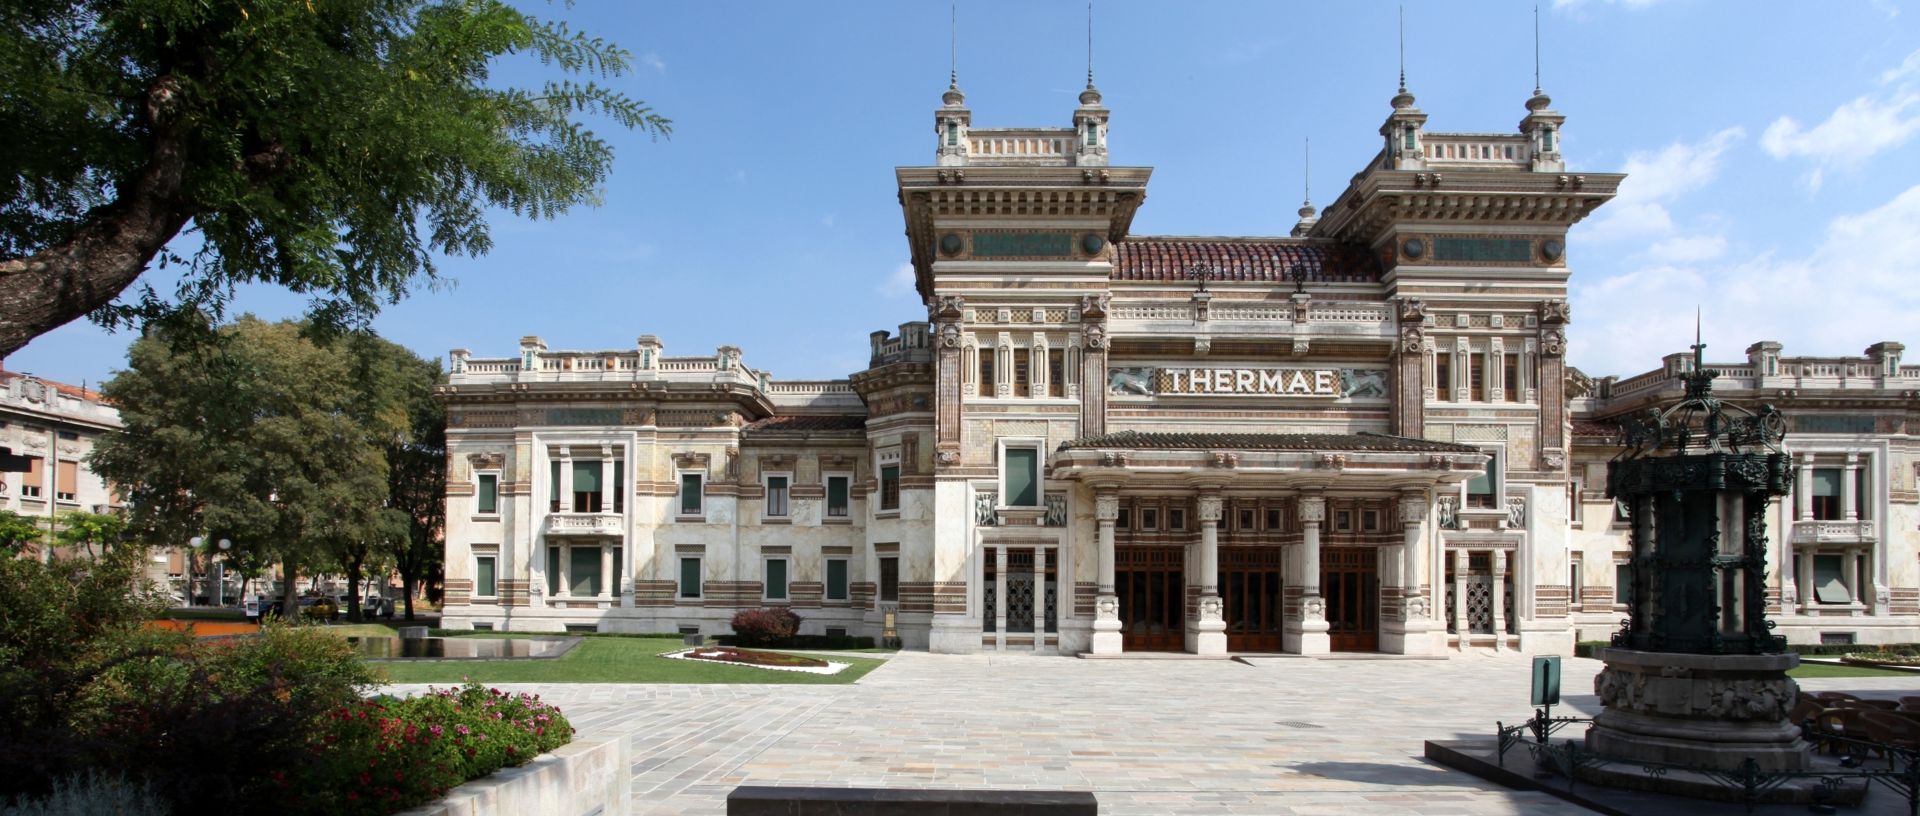 Salsomaggiore thermal baths